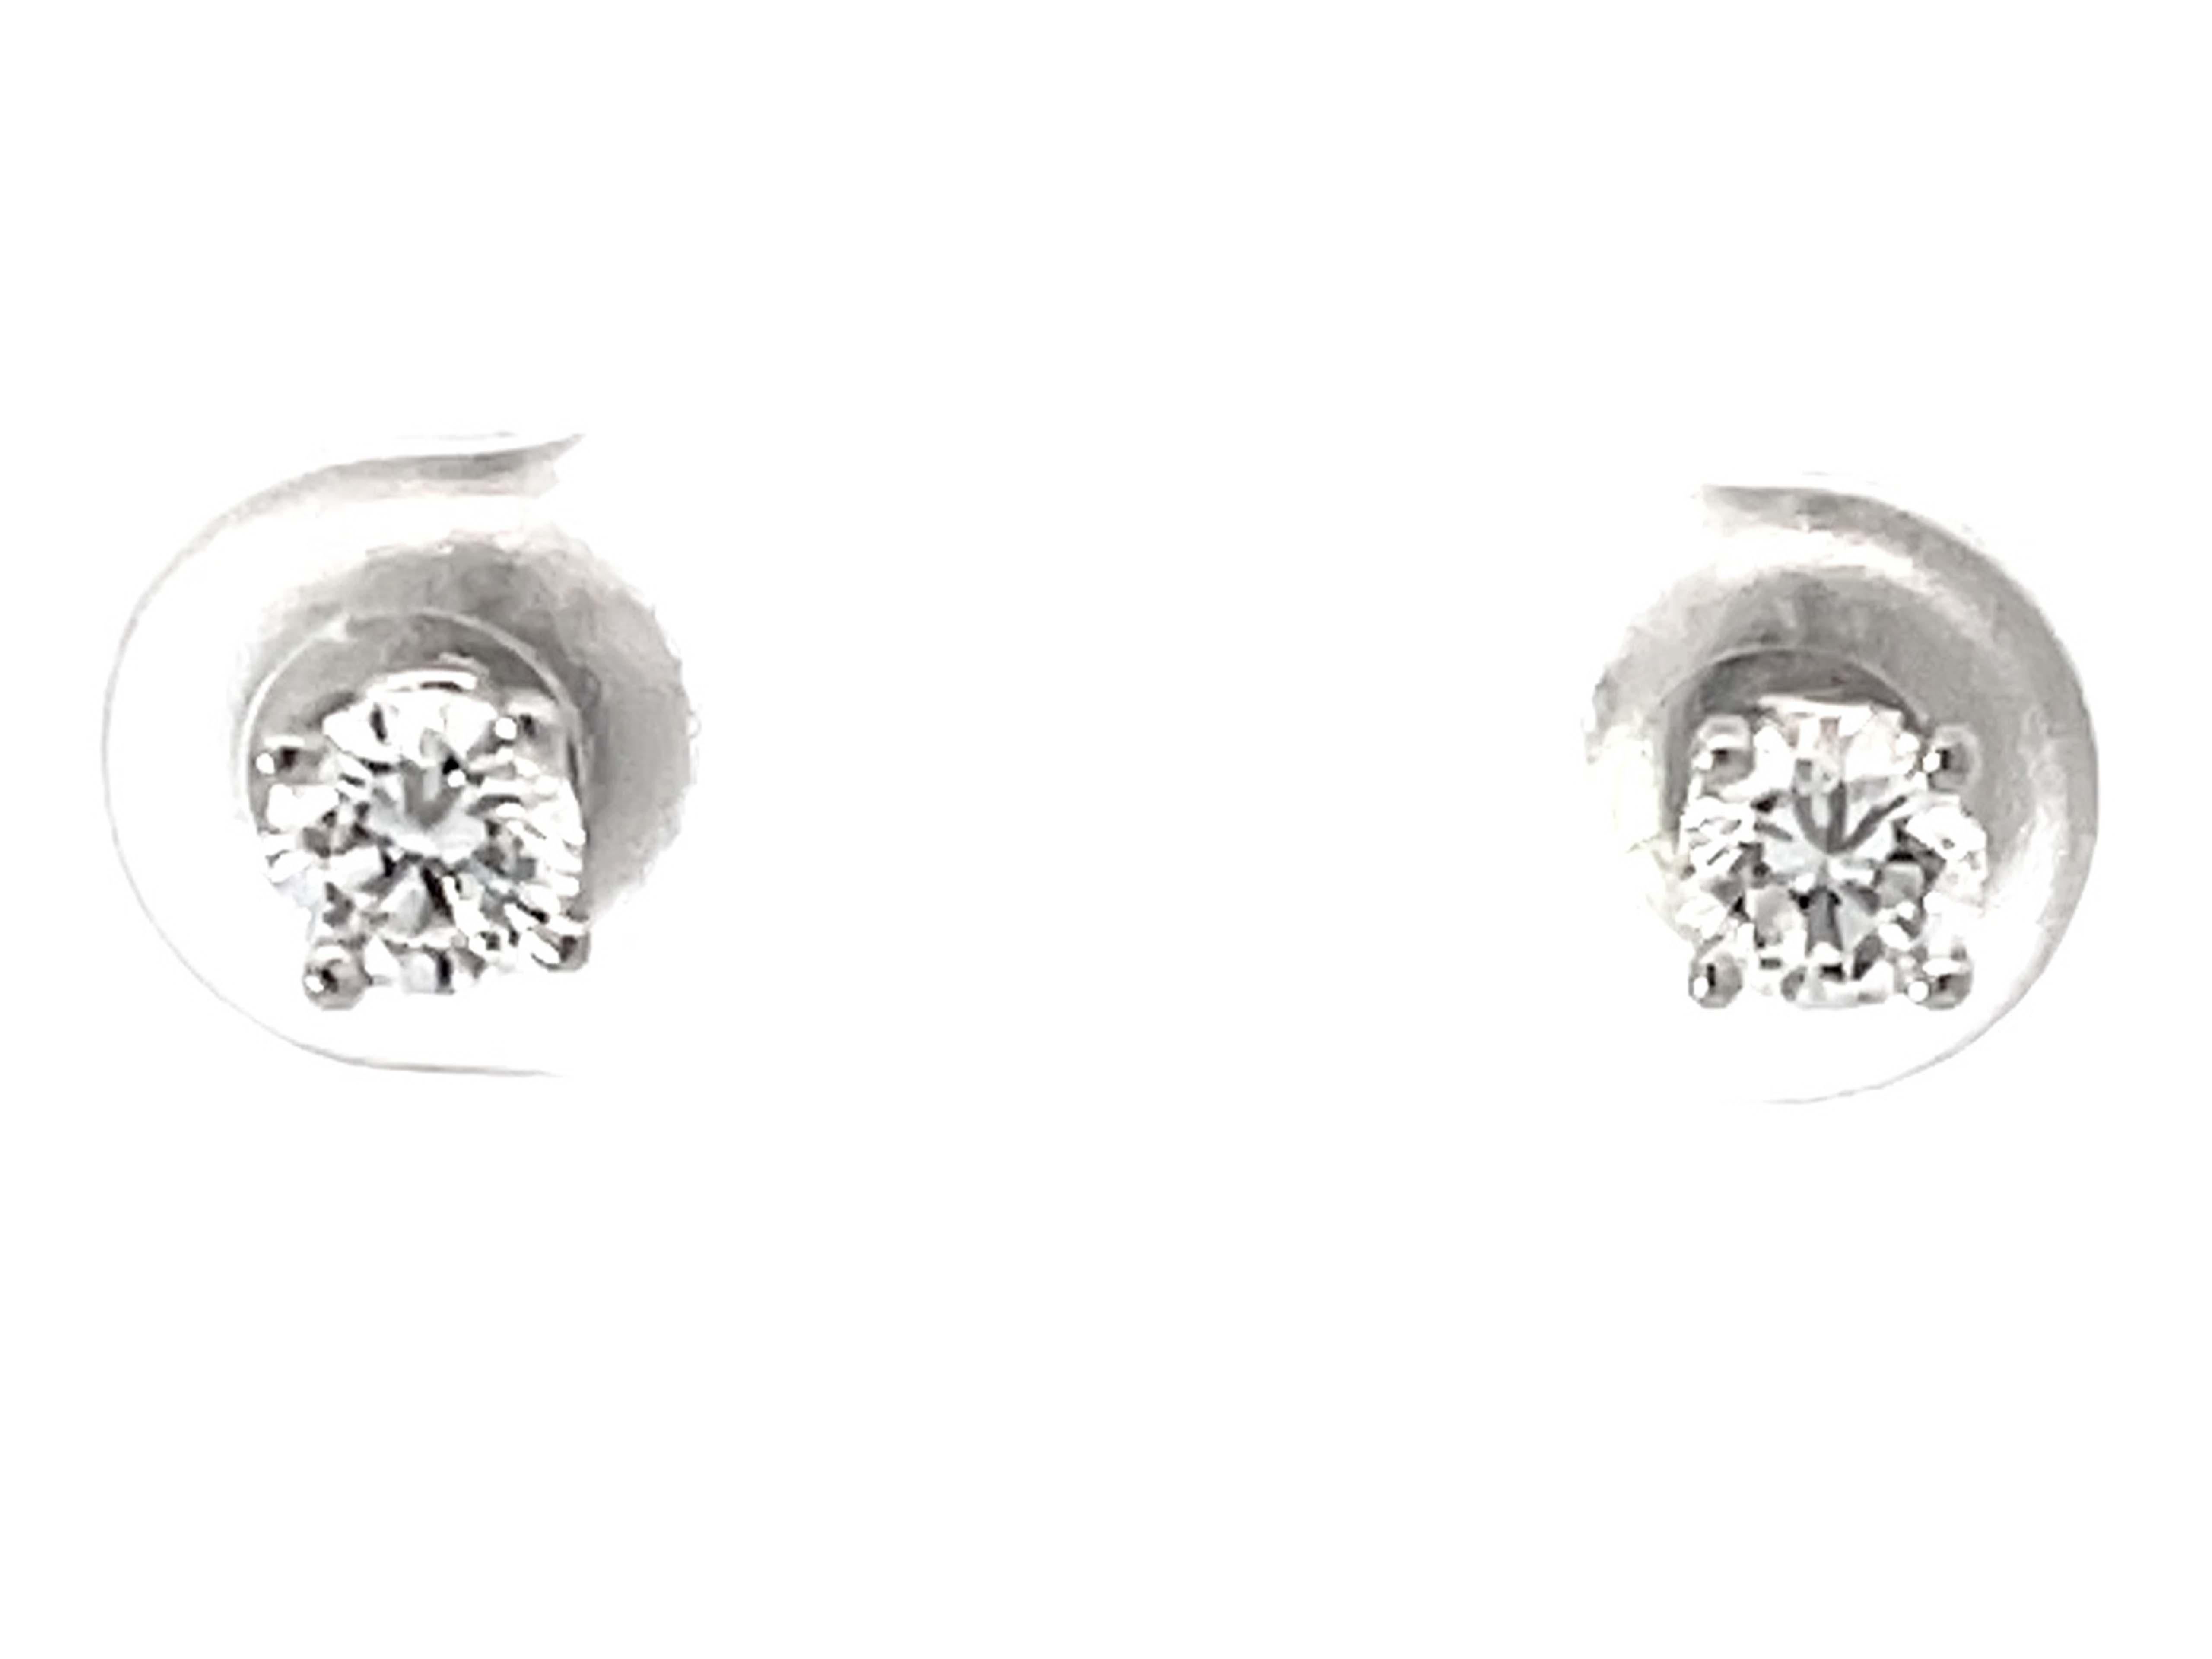 tiffany solitaire diamond earrings review